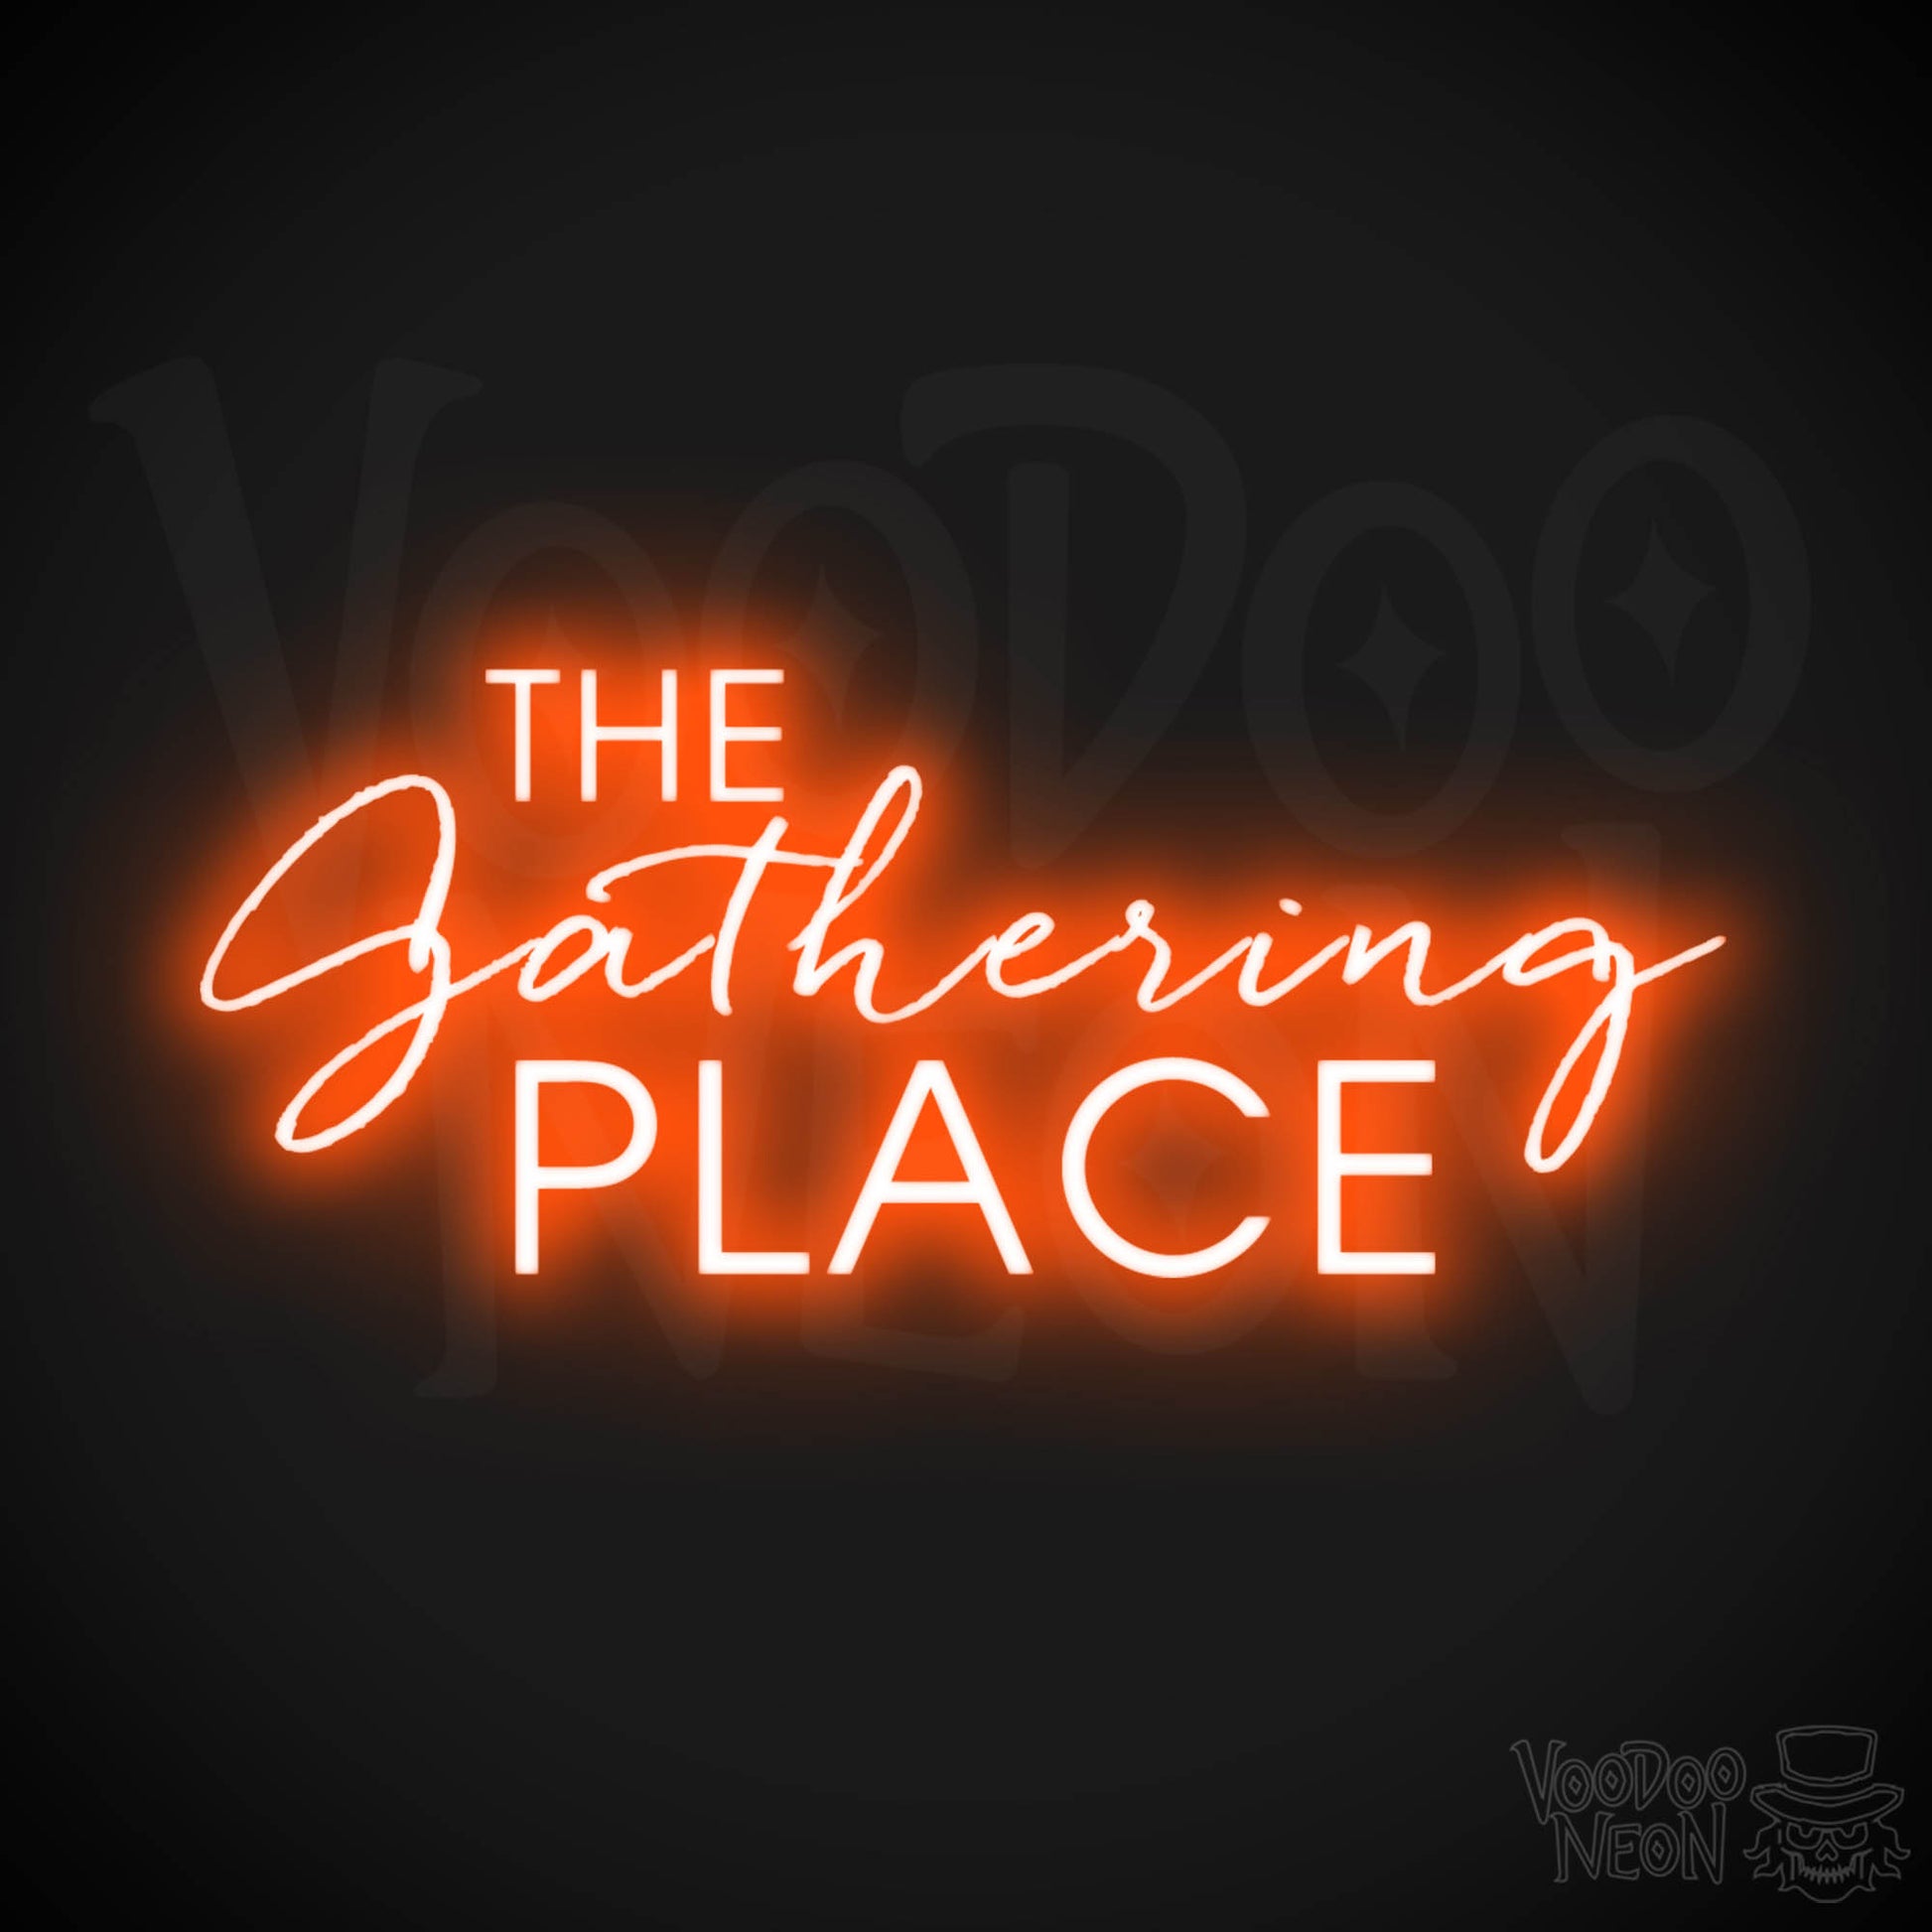 The Gathering Place Neon Sign - Neon The Gathering Place Sign - Wall Art - Color Orange